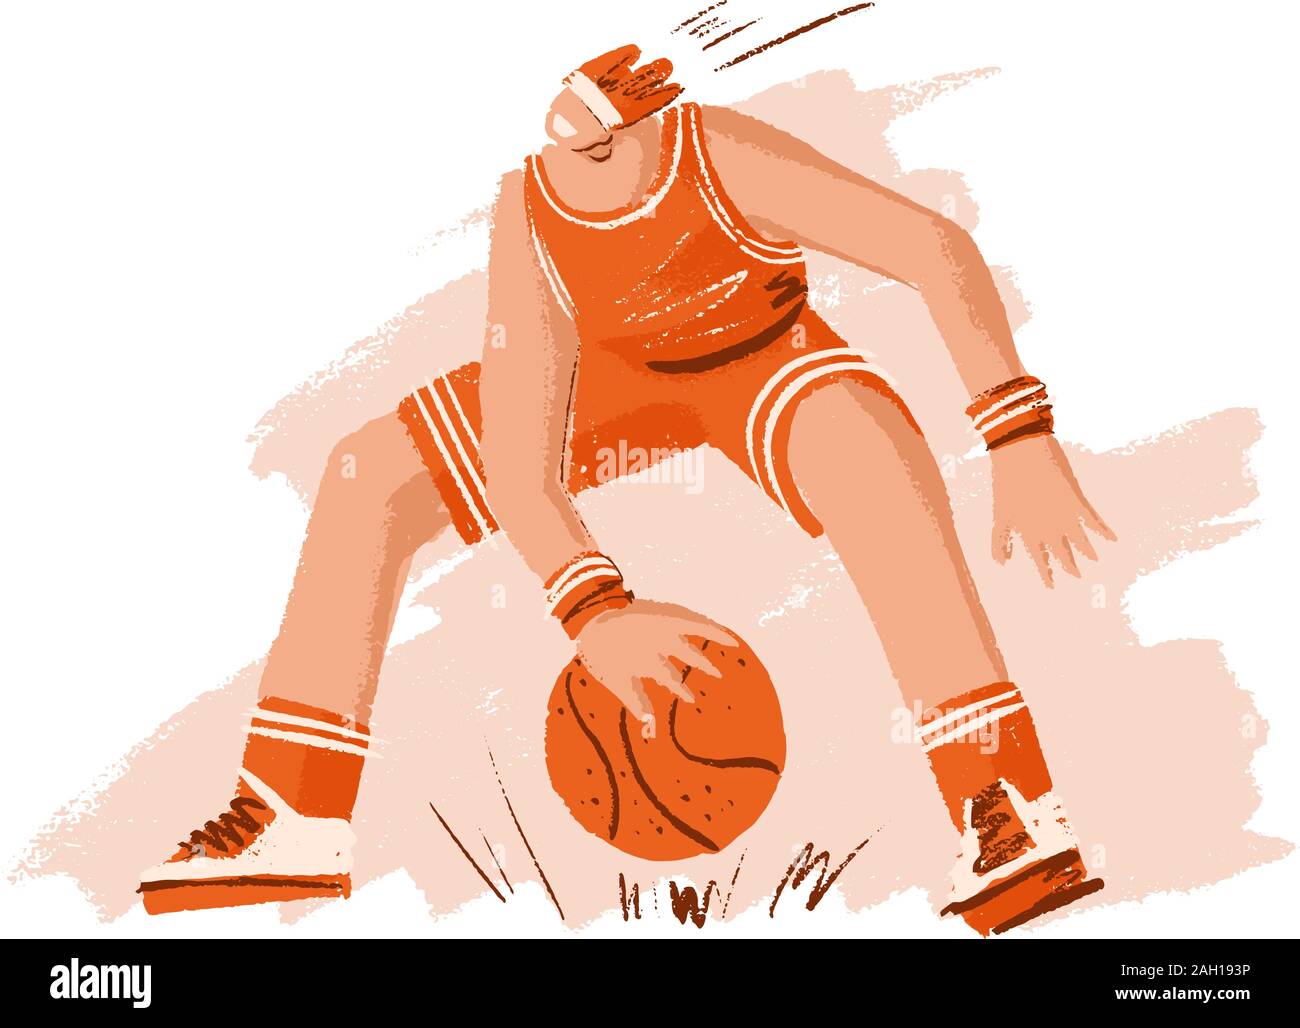 Vector hand drawn colored sketch illustration of professional basketball player, playing with basketball ball in dynamic pose, isolated on white. Hand Stock Vector